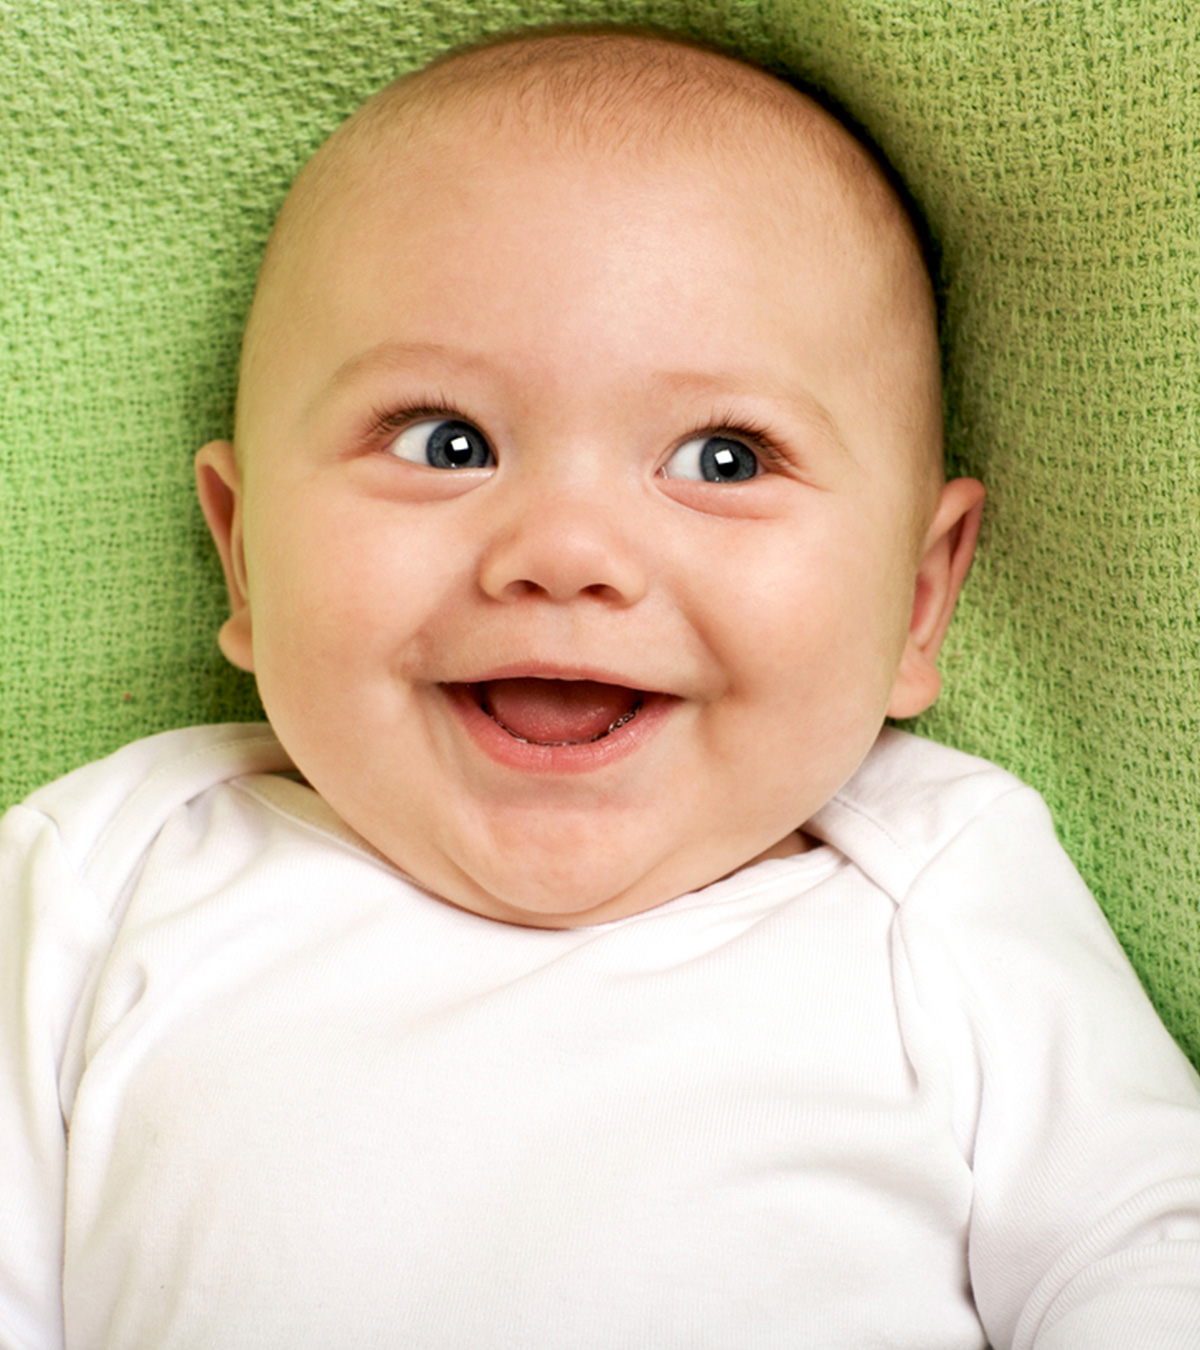 14 Baby Body Language Cues And Their Meaning